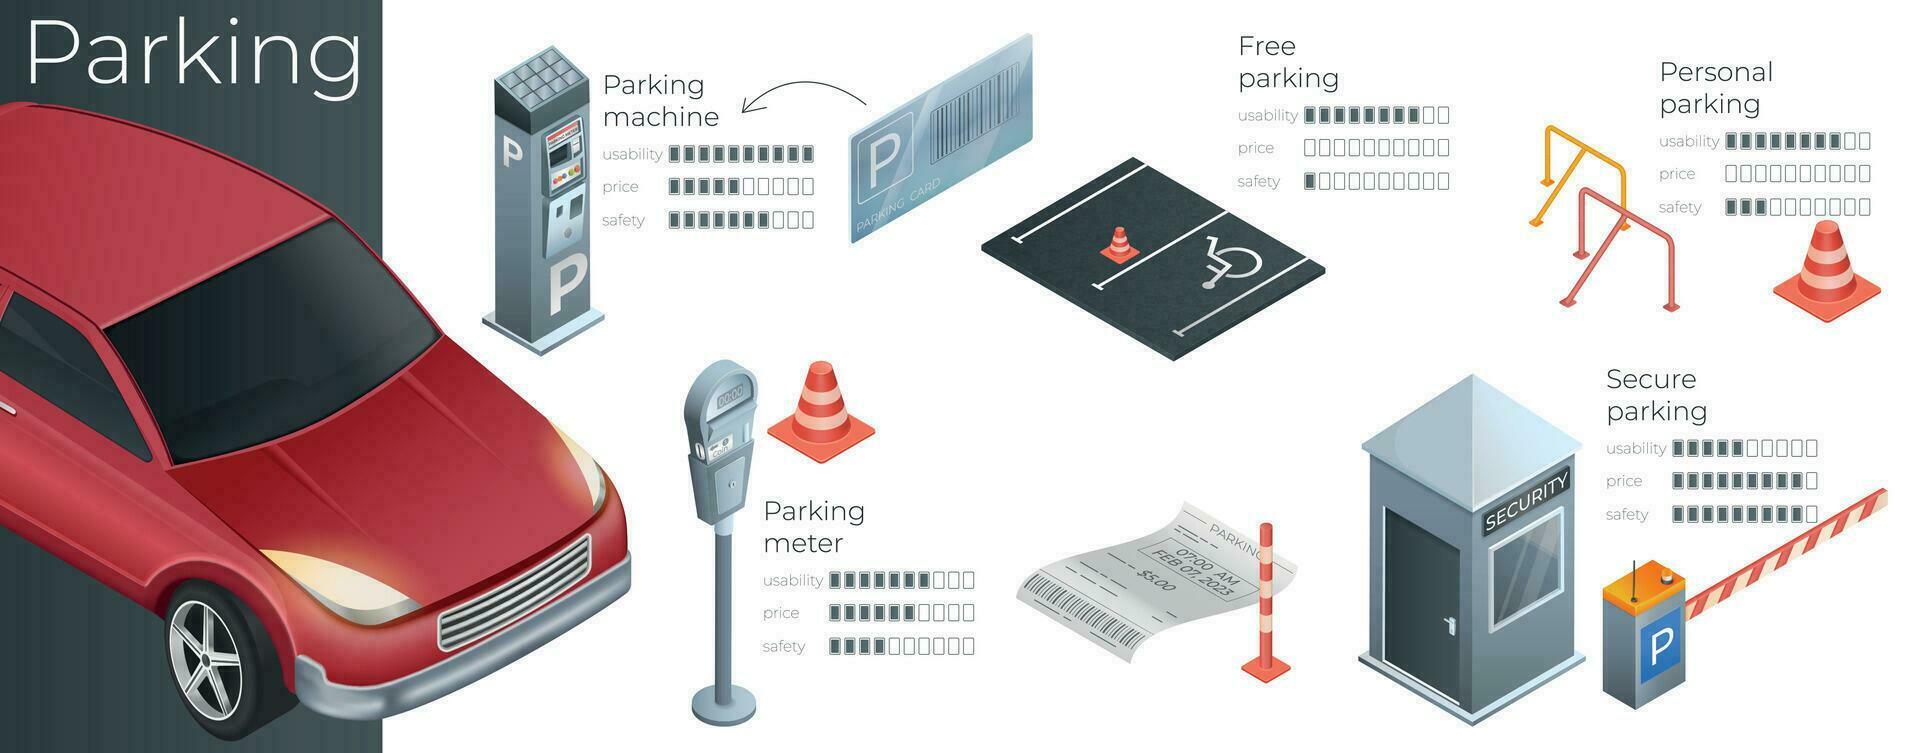 Parking Realistic Infographic vector